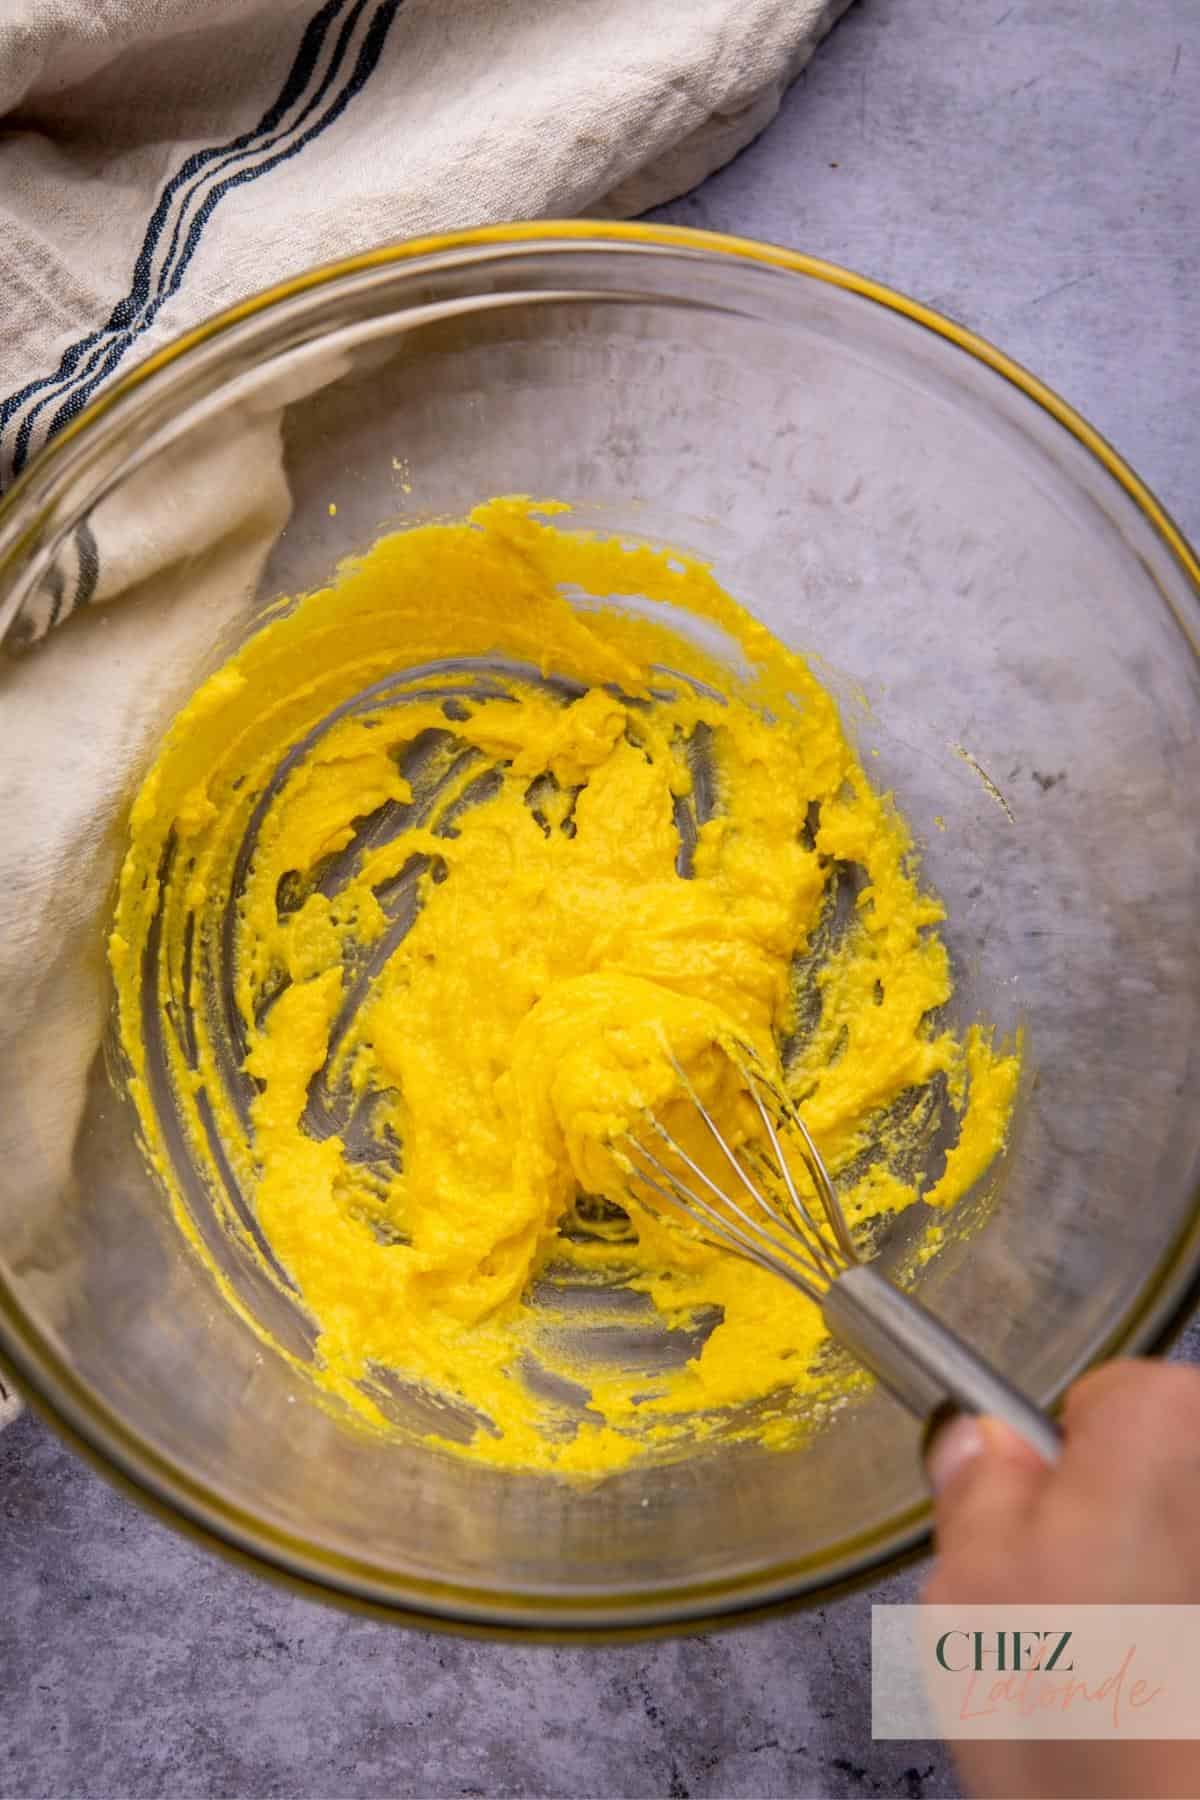 well combine egg yolks and cheese to a paste like consistency.